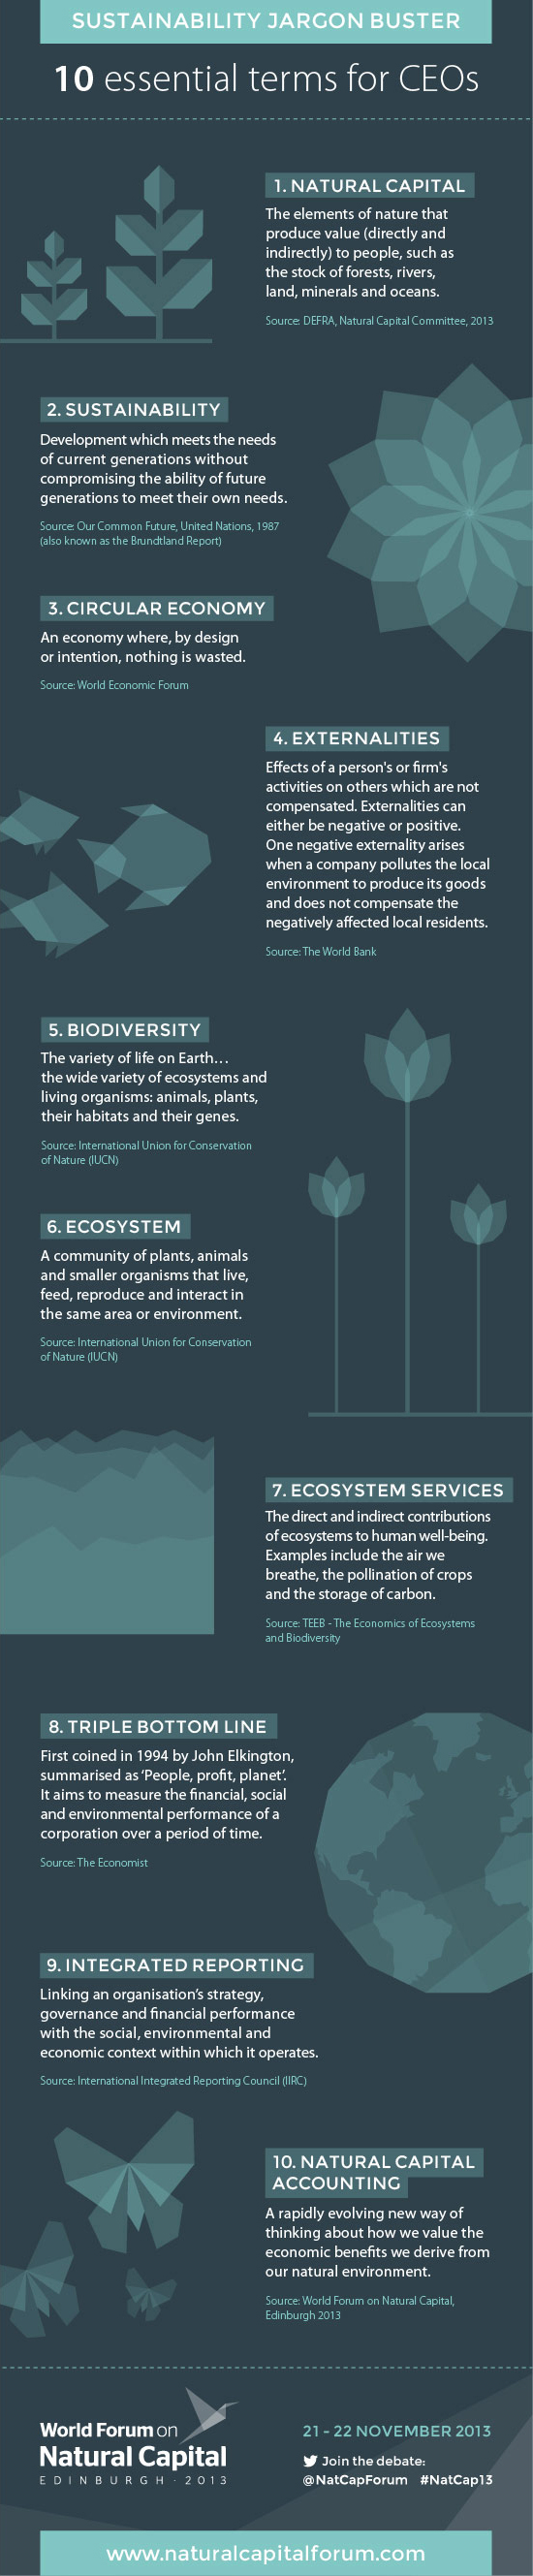 Sustainability Jargon Buster Infographic